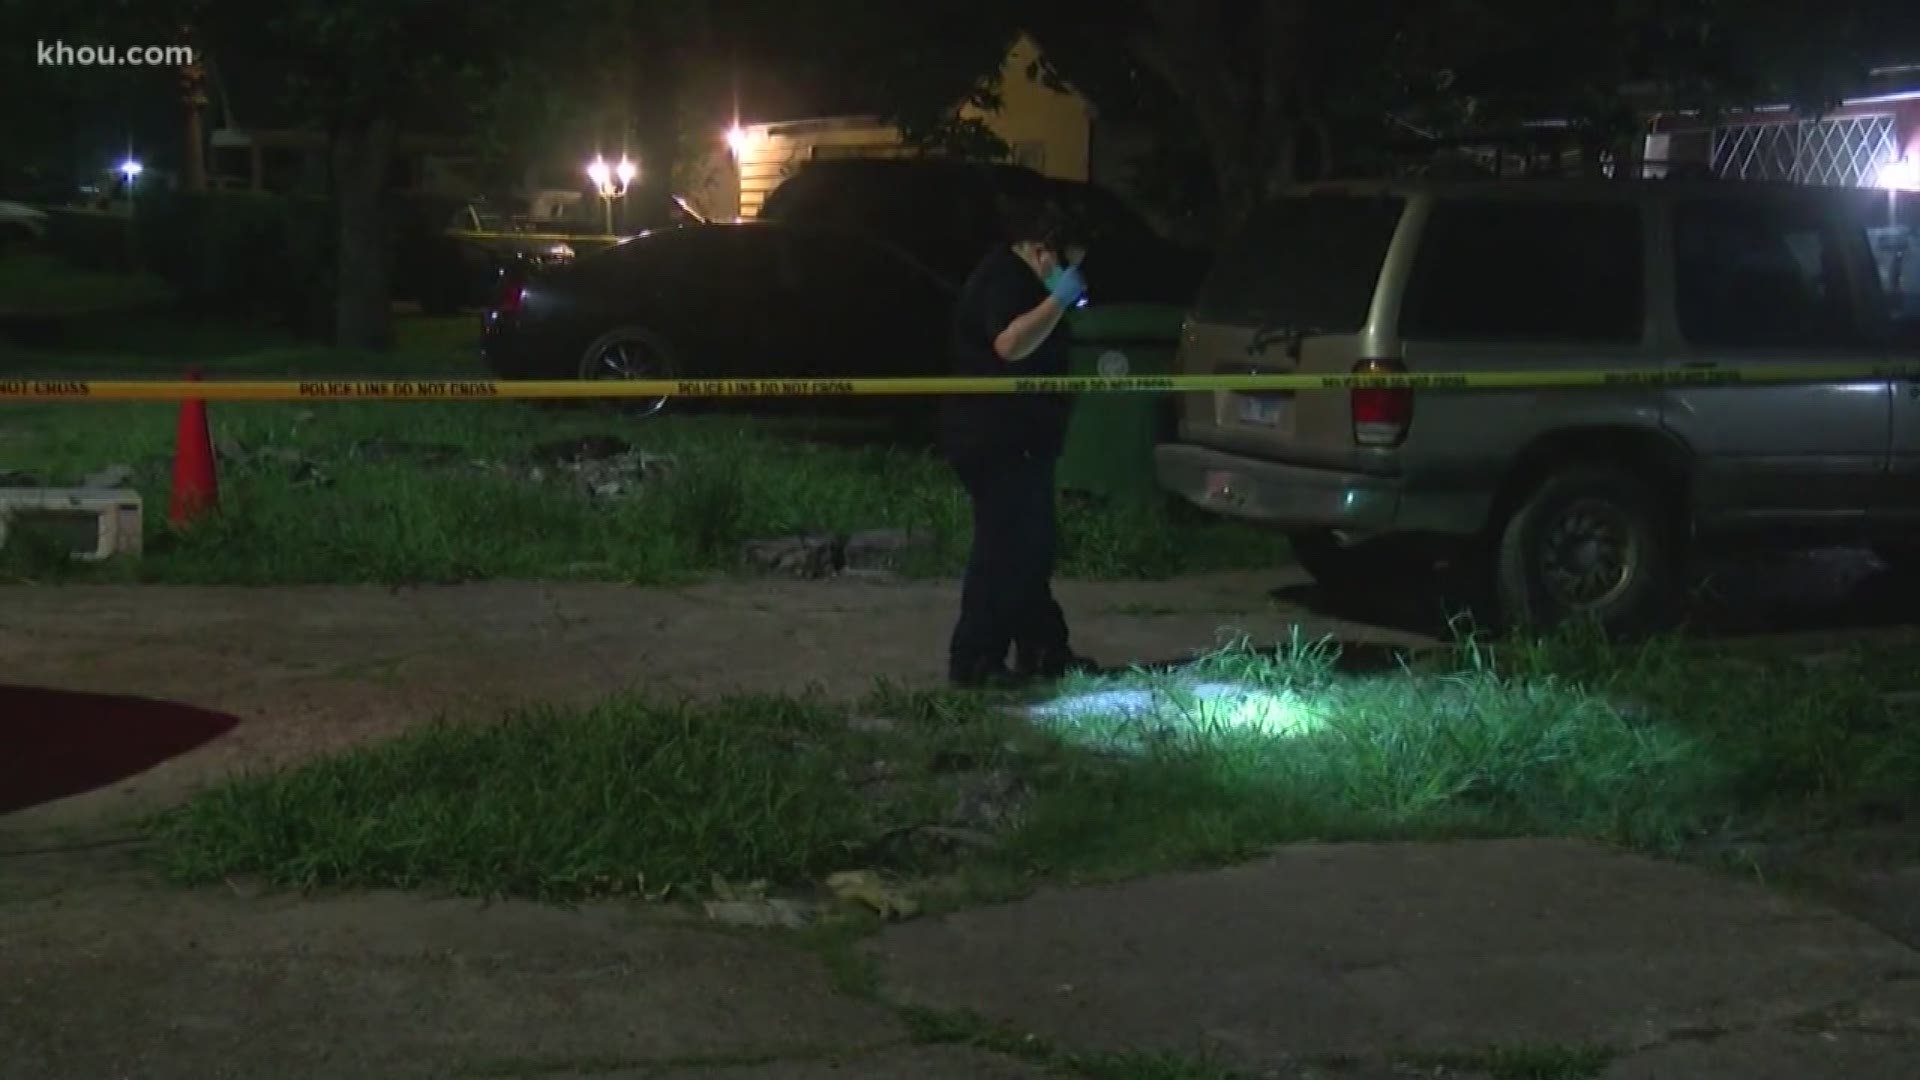 A homeowner fatally shot a 19-year-old man outside a home in east Houston late Tuesday, police said.